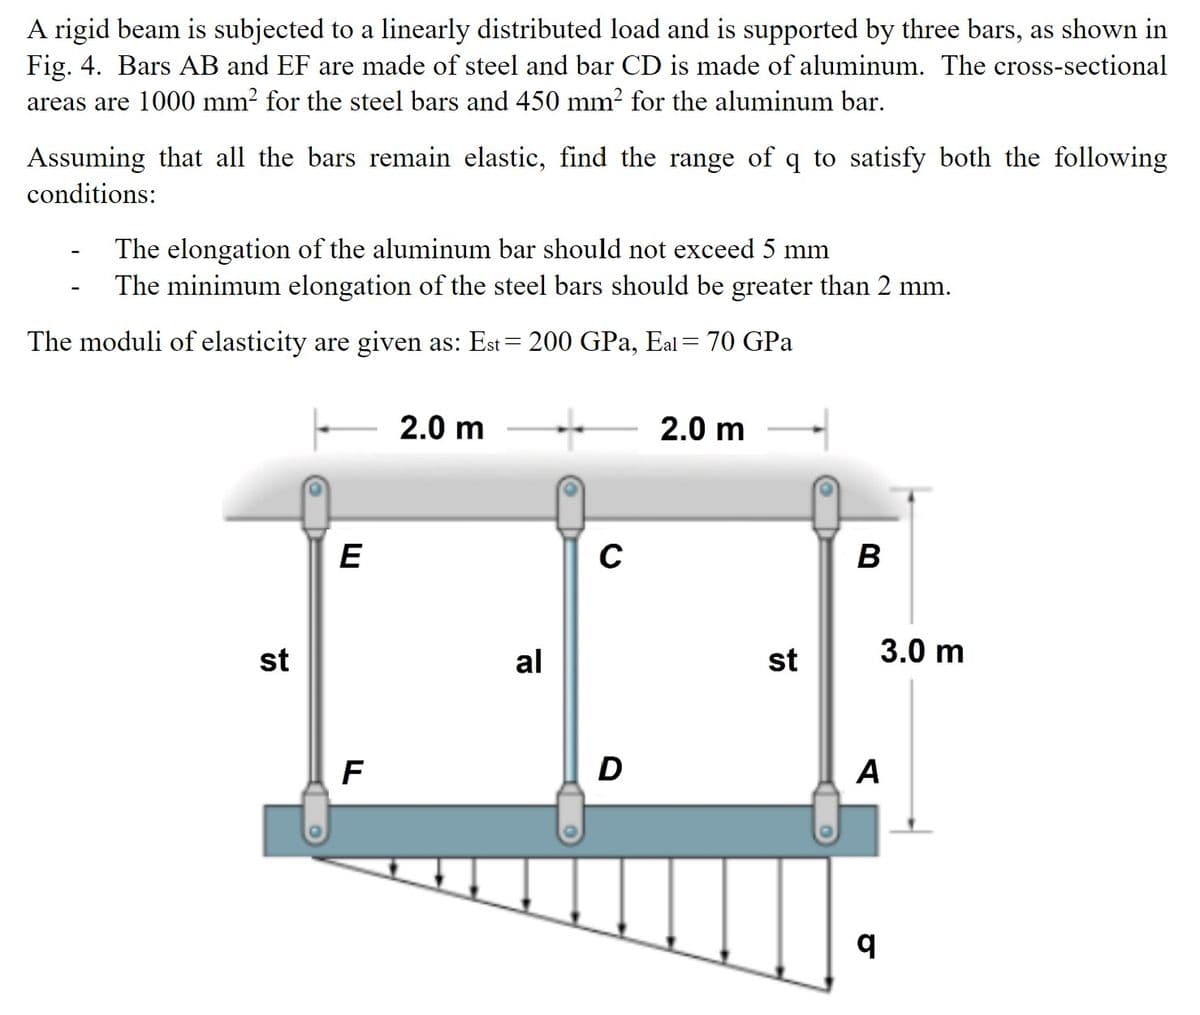 A rigid beam is subjected to a linearly distributed load and is supported by three bars, as shown in
Fig. 4. Bars AB and EF are made of steel and bar CD is made of aluminum. The cross-sectional
areas are 1000 mm² for the steel bars and 450 mm² for the aluminum bar.
Assuming that all the bars remain elastic, find the range of q to satisfy both the following
conditions:
-
-
The elongation of the aluminum bar should not exceed 5 mm
The minimum elongation of the steel bars should be greater than 2 mm.
The moduli of elasticity are given as: Est = 200 GPa, Eal = 70 GPa
st
E
F
2.0 m
al
C
D
2.0 m
st
B
3.0 m
A
q